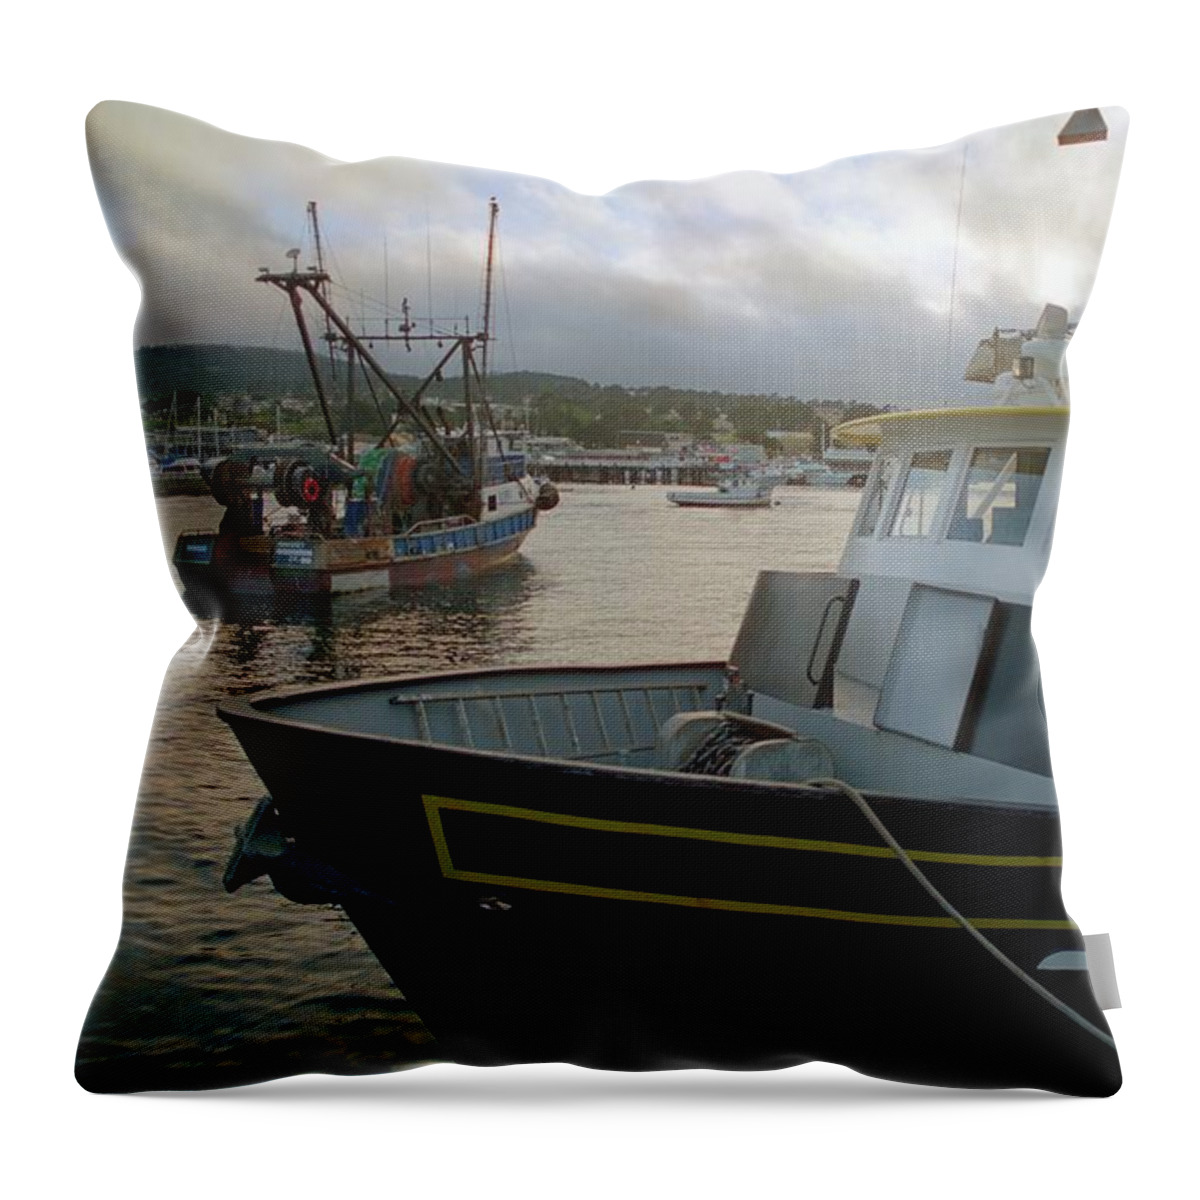 Monterey Throw Pillow featuring the photograph Bow And Stern by James B Toy